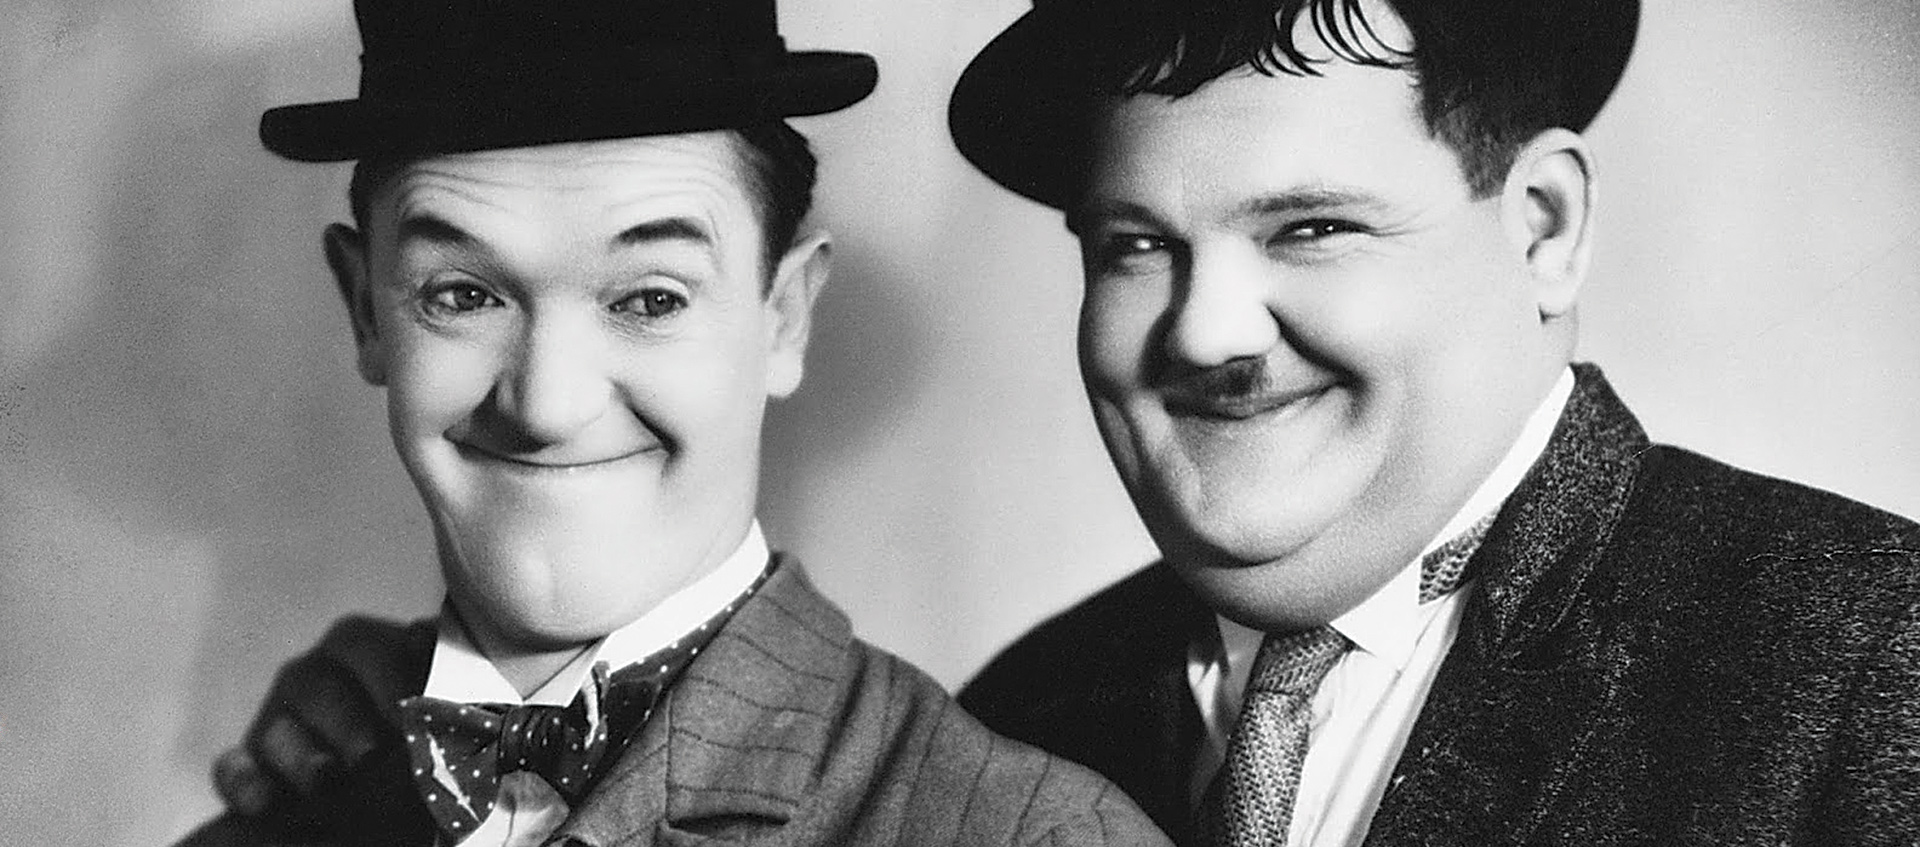 Two men in bowler hats smile for the camera